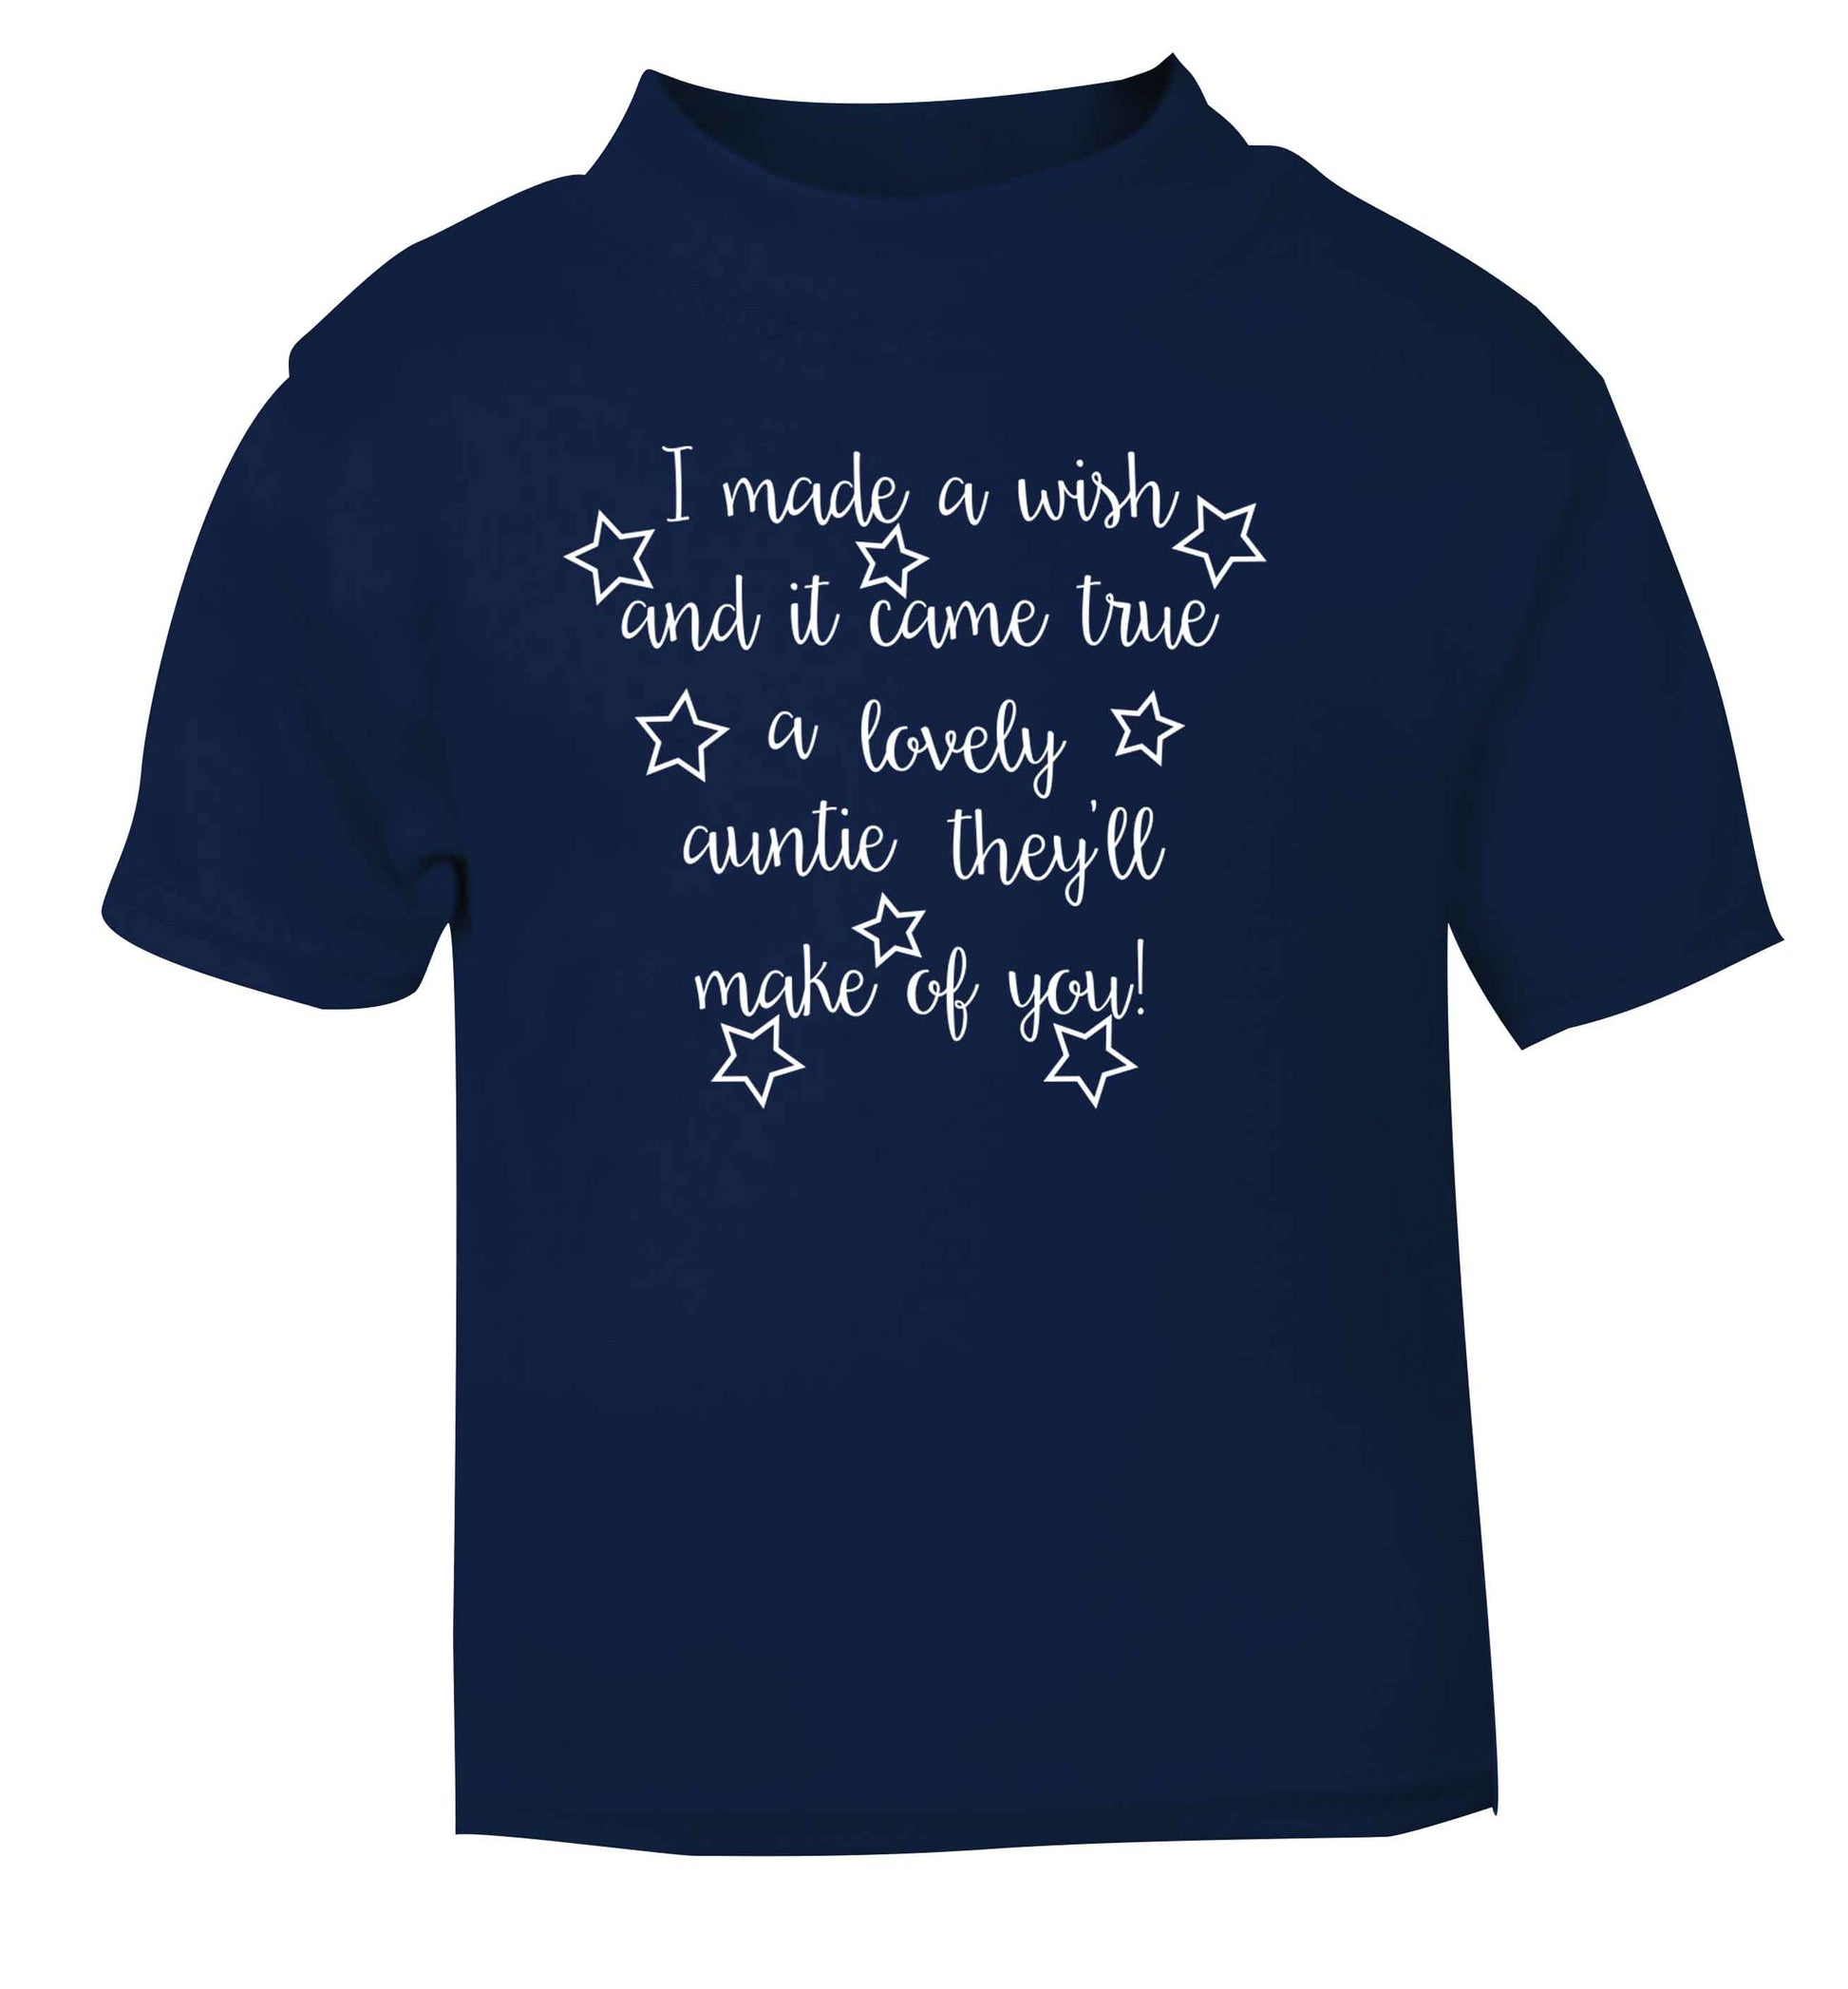 I made a wish and it came true a lovely auntie they'll make of you! navy Baby Toddler Tshirt 2 Years